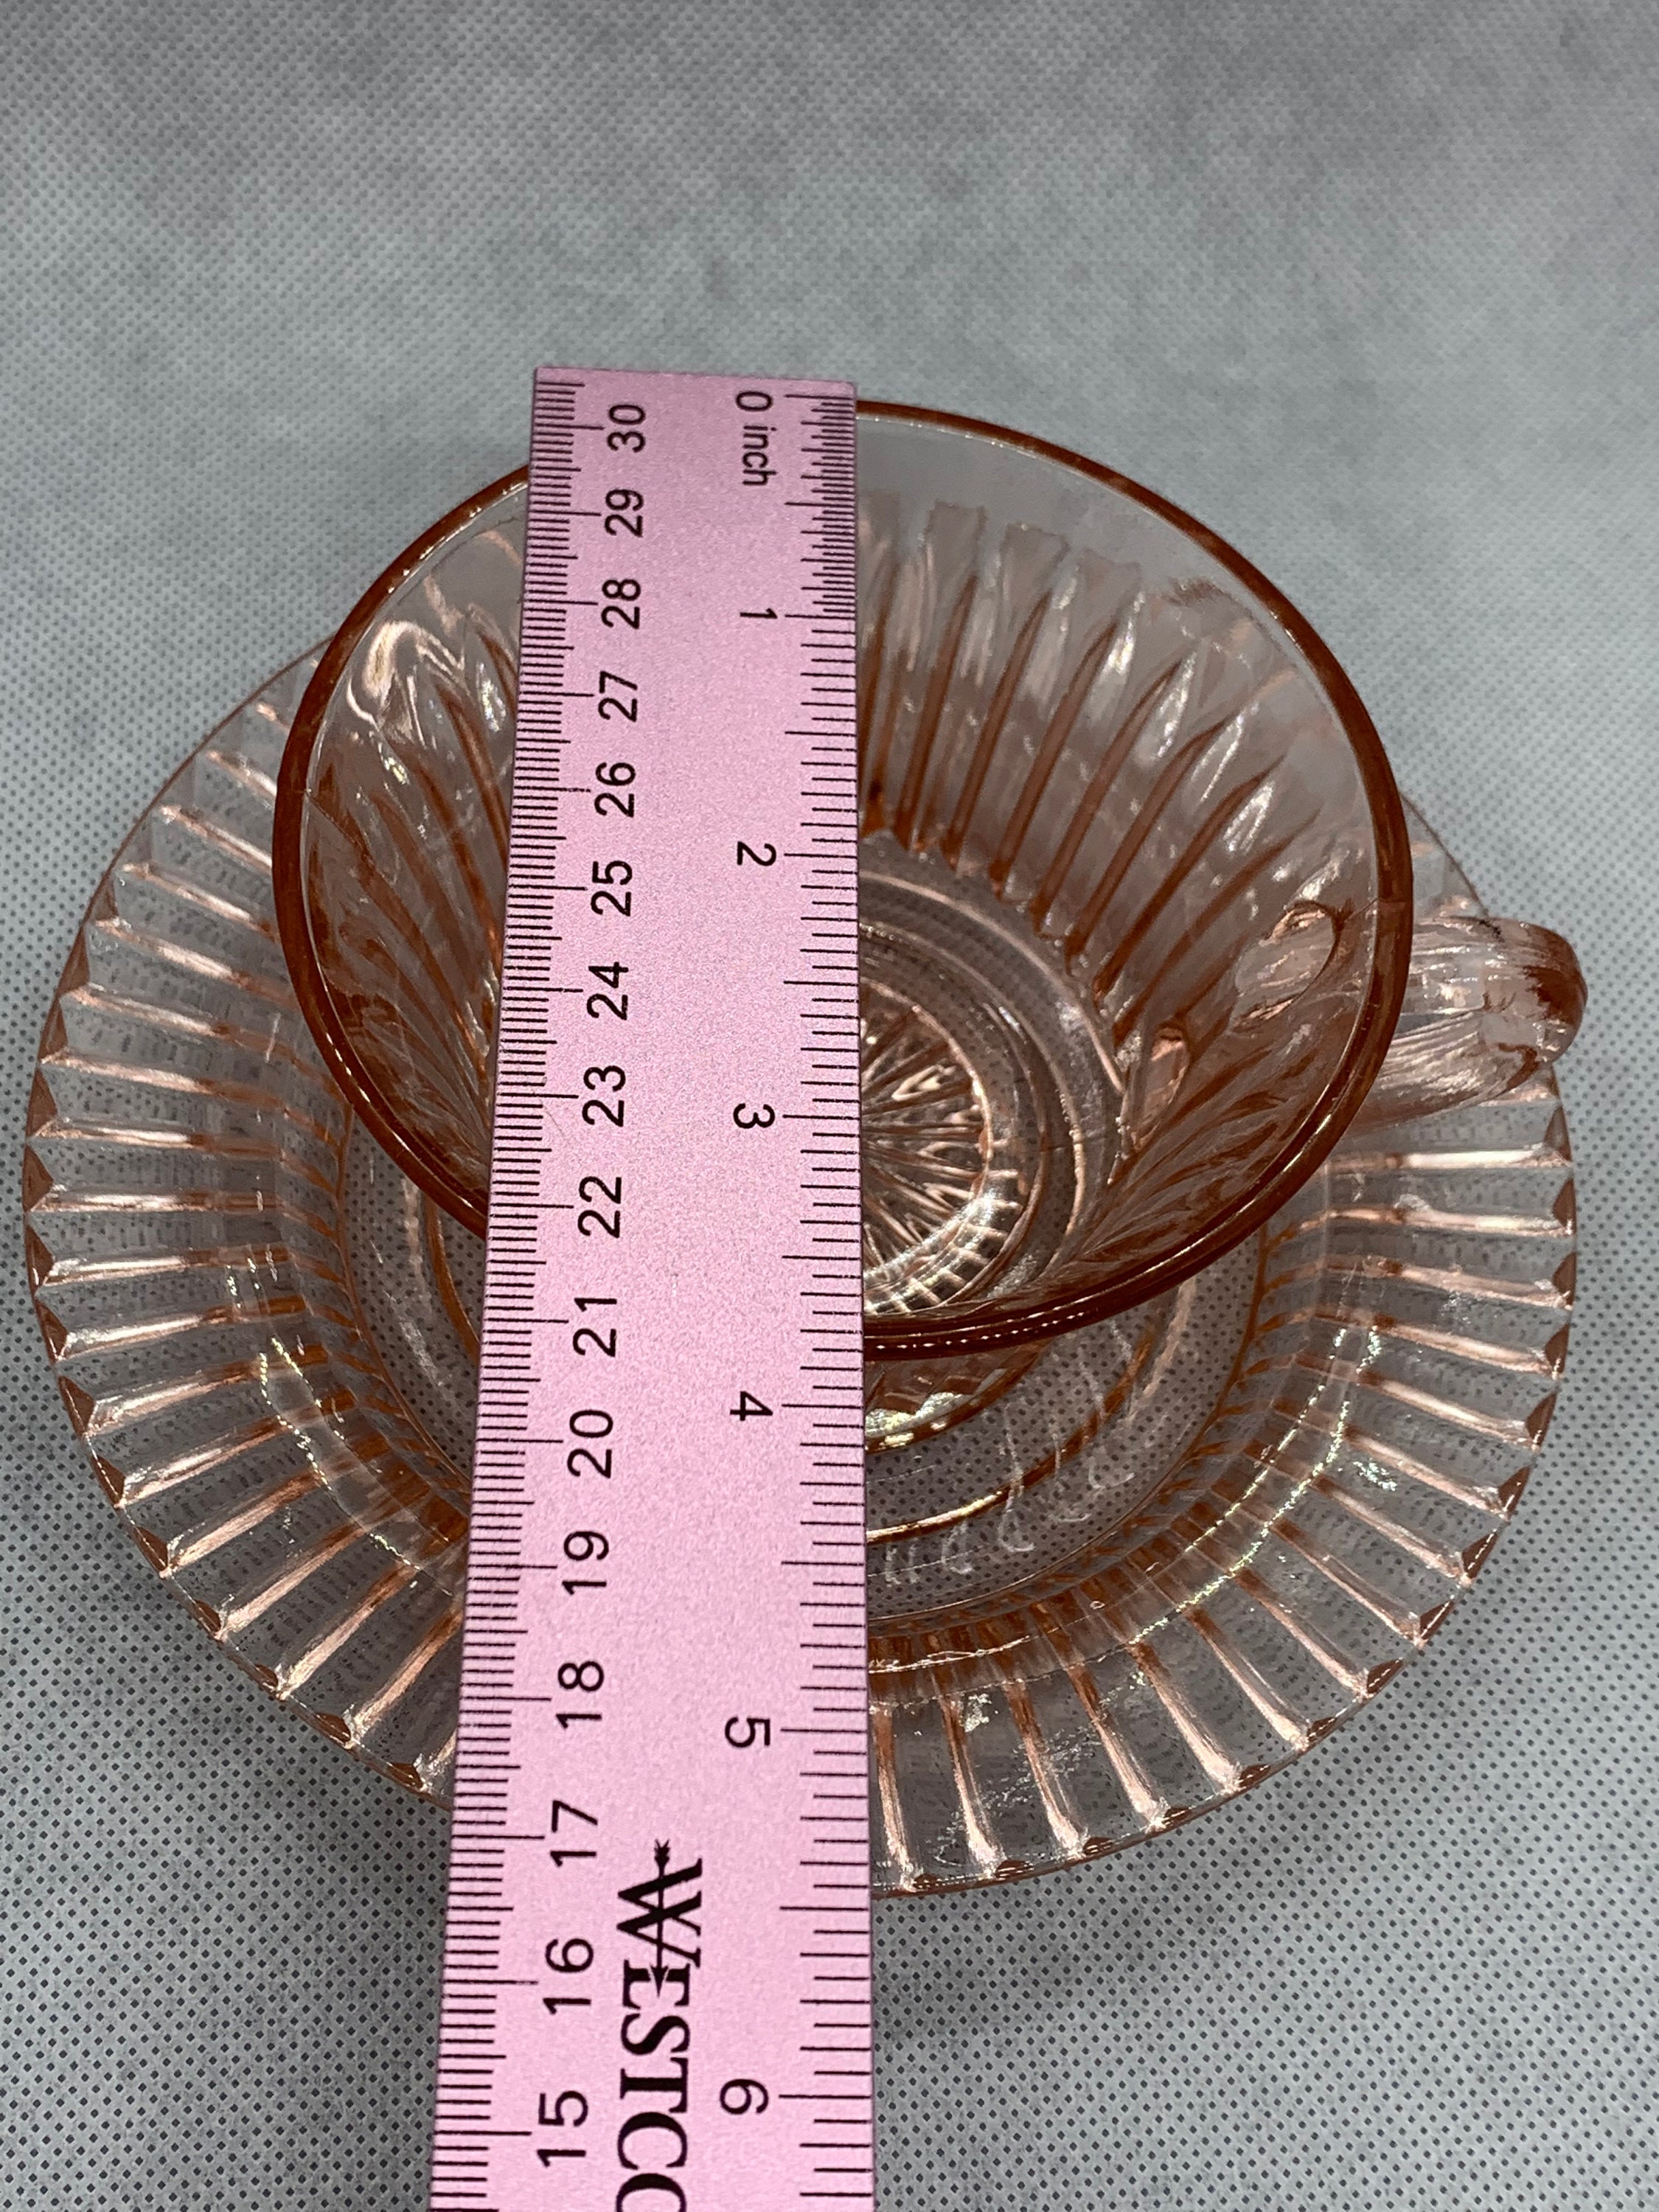 Cup Cup and Etsy Depression Glass Pointed Handle Queen Saucer Hocking Mary Anchor Pink Set, -